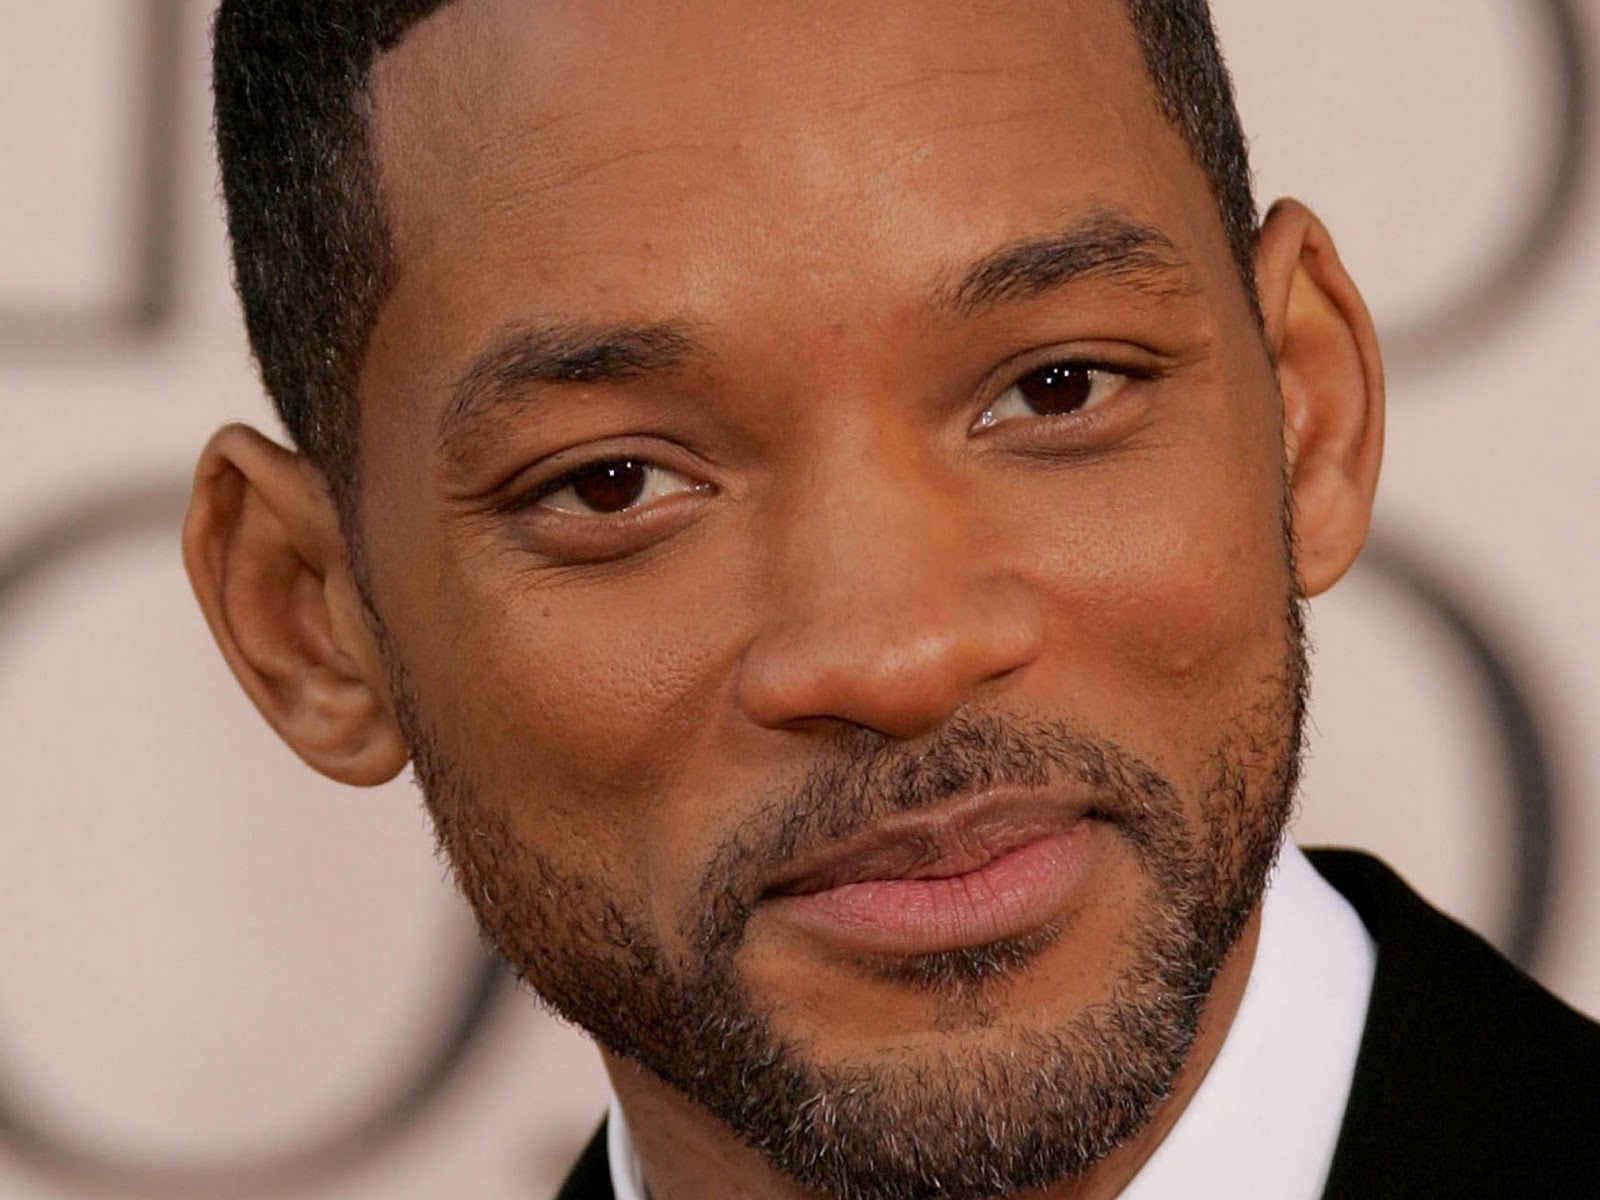 Actor Will Smith wallpapers and images  wallpapers, pictures, photos